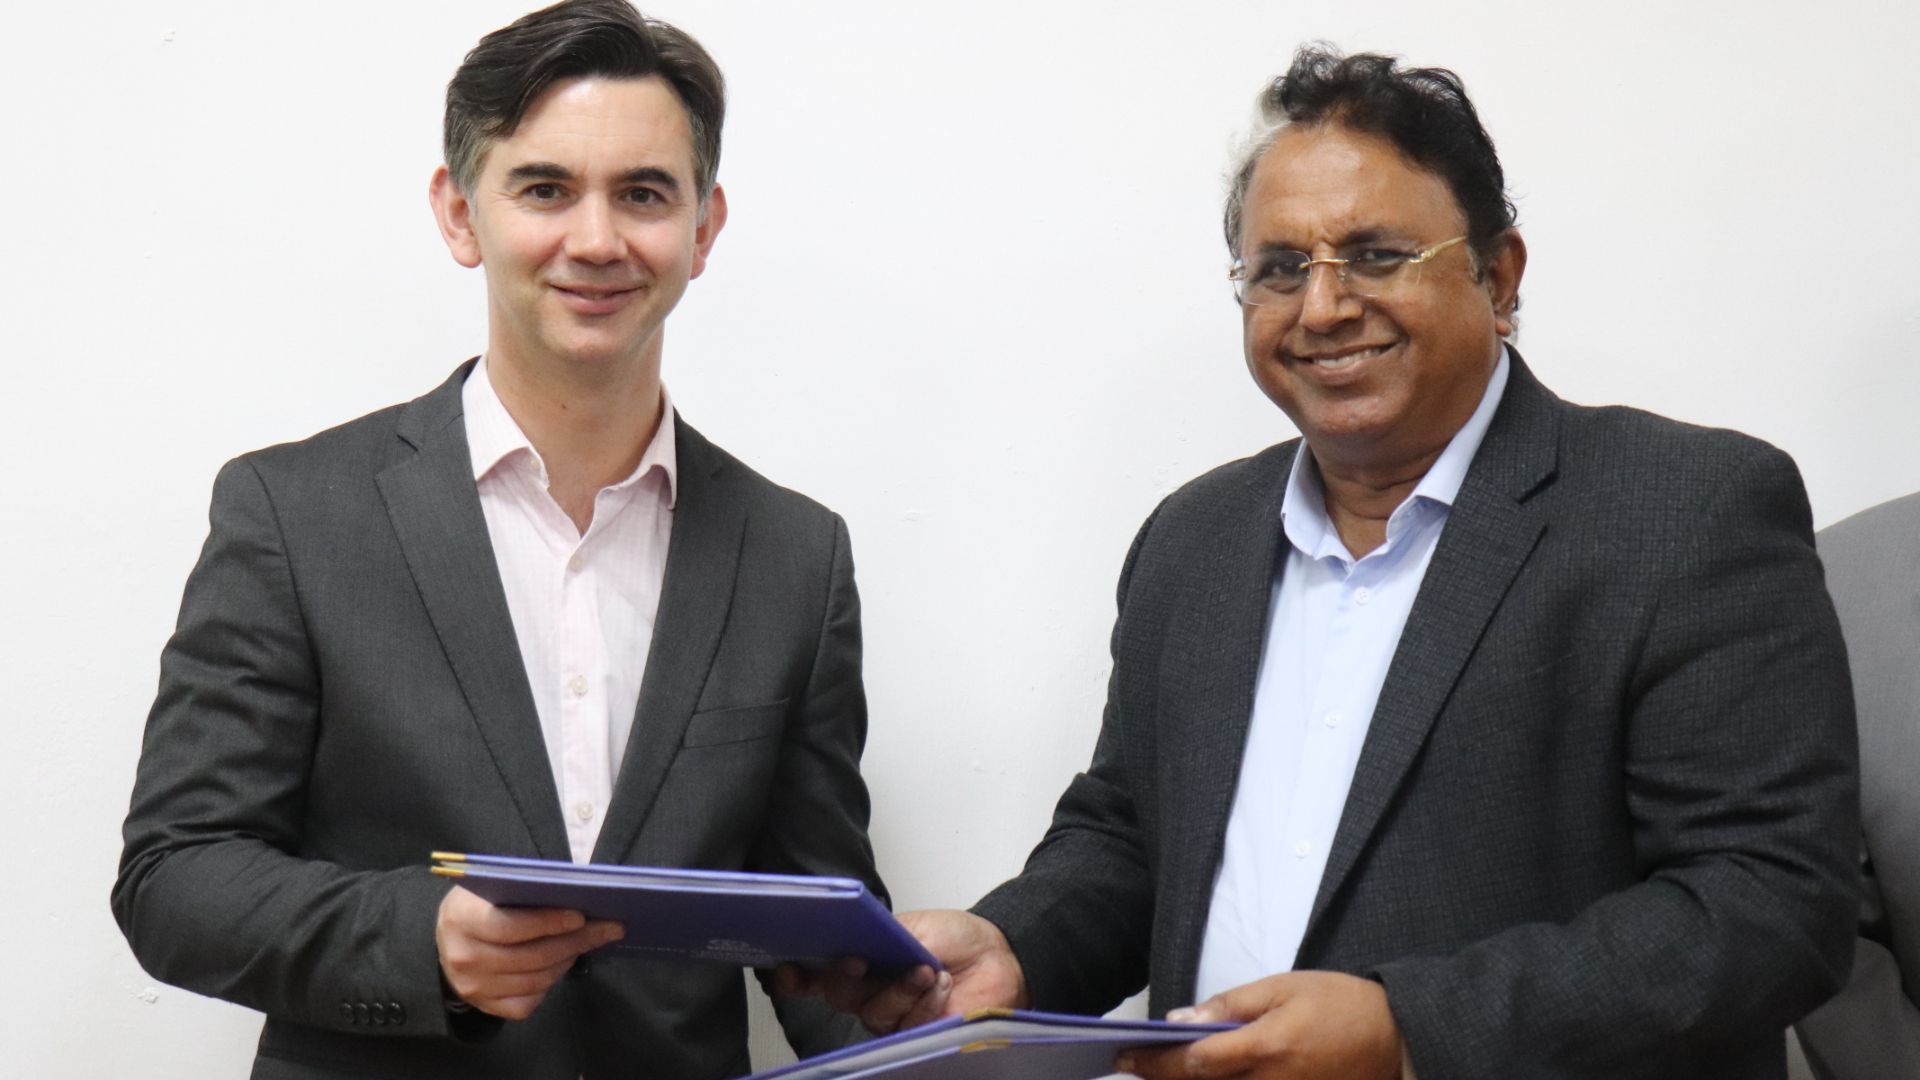 Charles Sturt signs partnerships with universities and higher education institutions in India